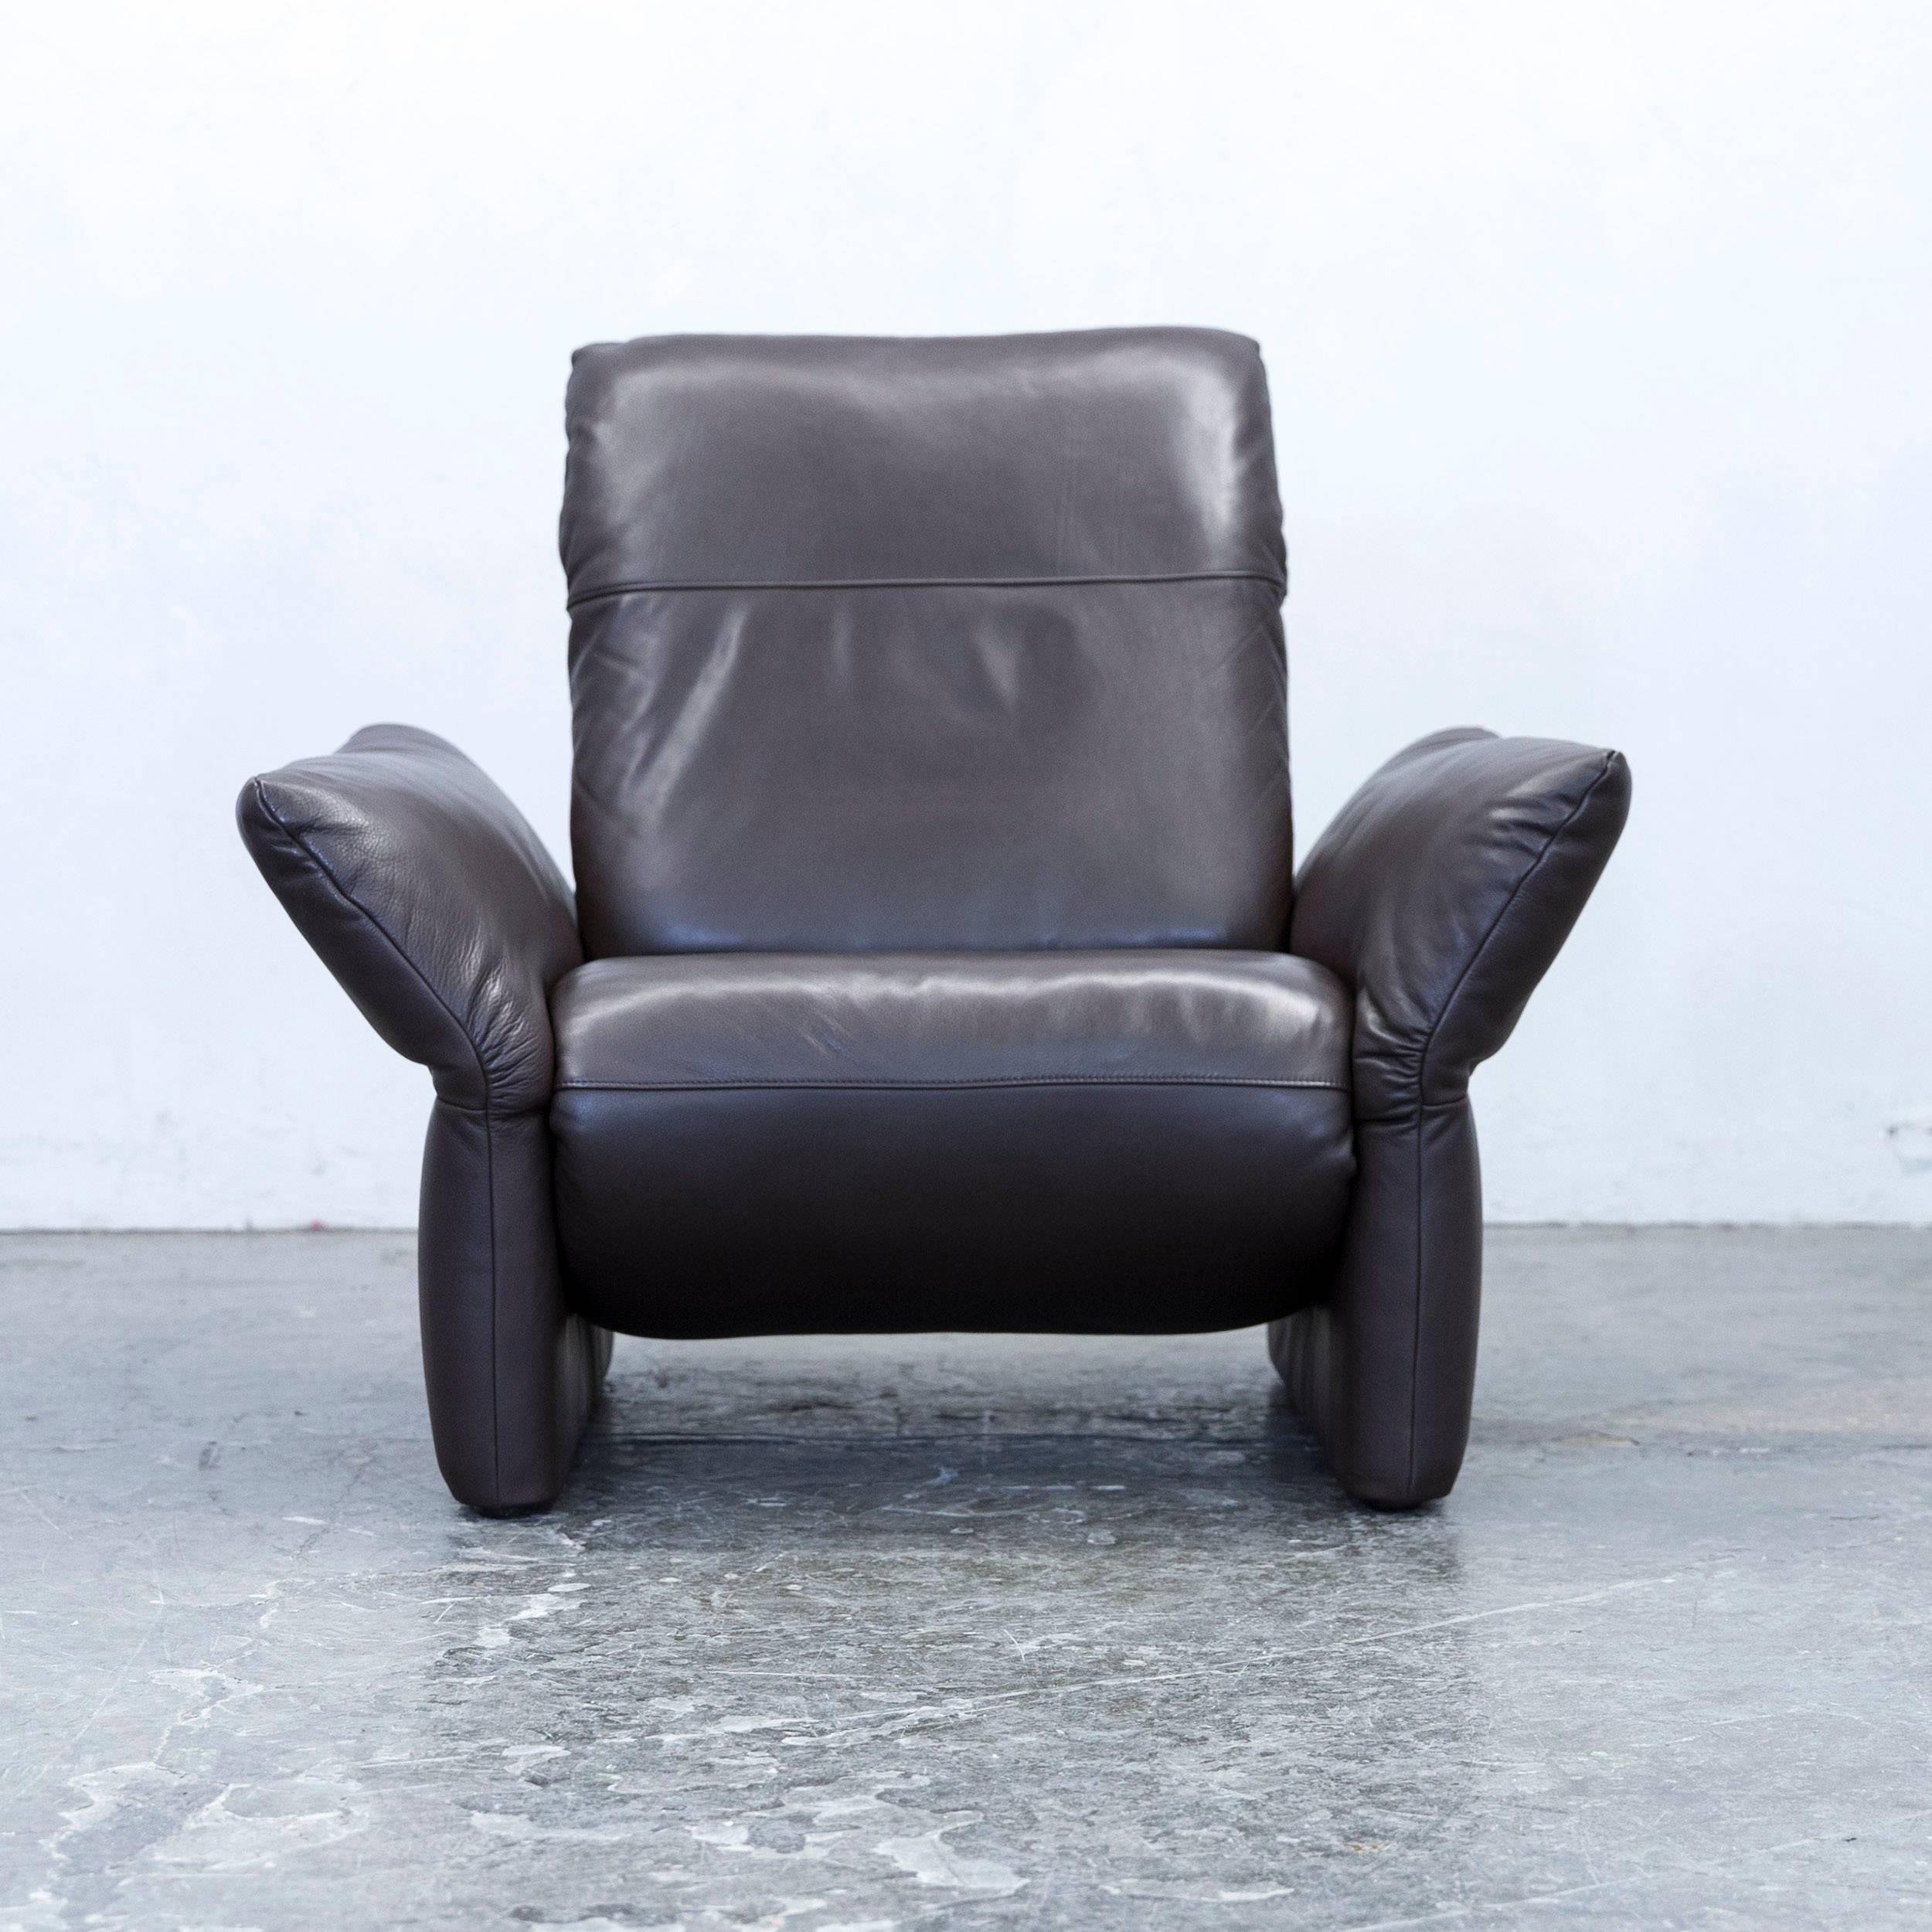 Brown colored Koinor Elena designer leather armchair, in a minimalistic and modern design, made for pure comfort.